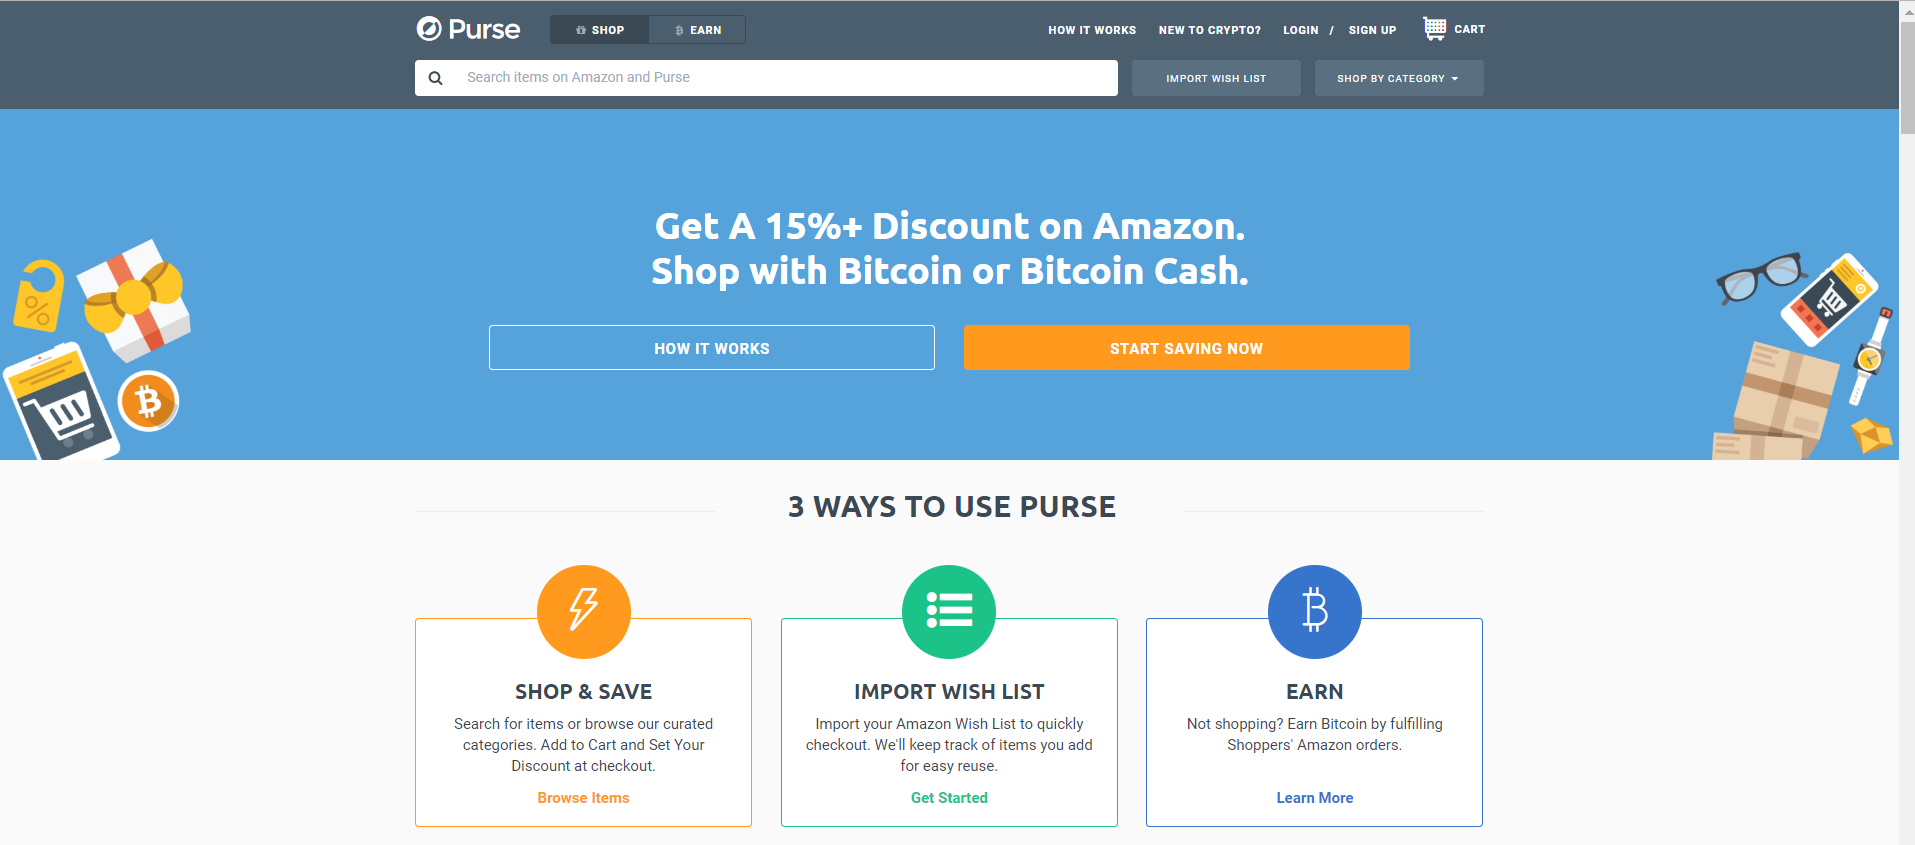 You Can Now Shop With Bitcoin on Amazon Using Lightning